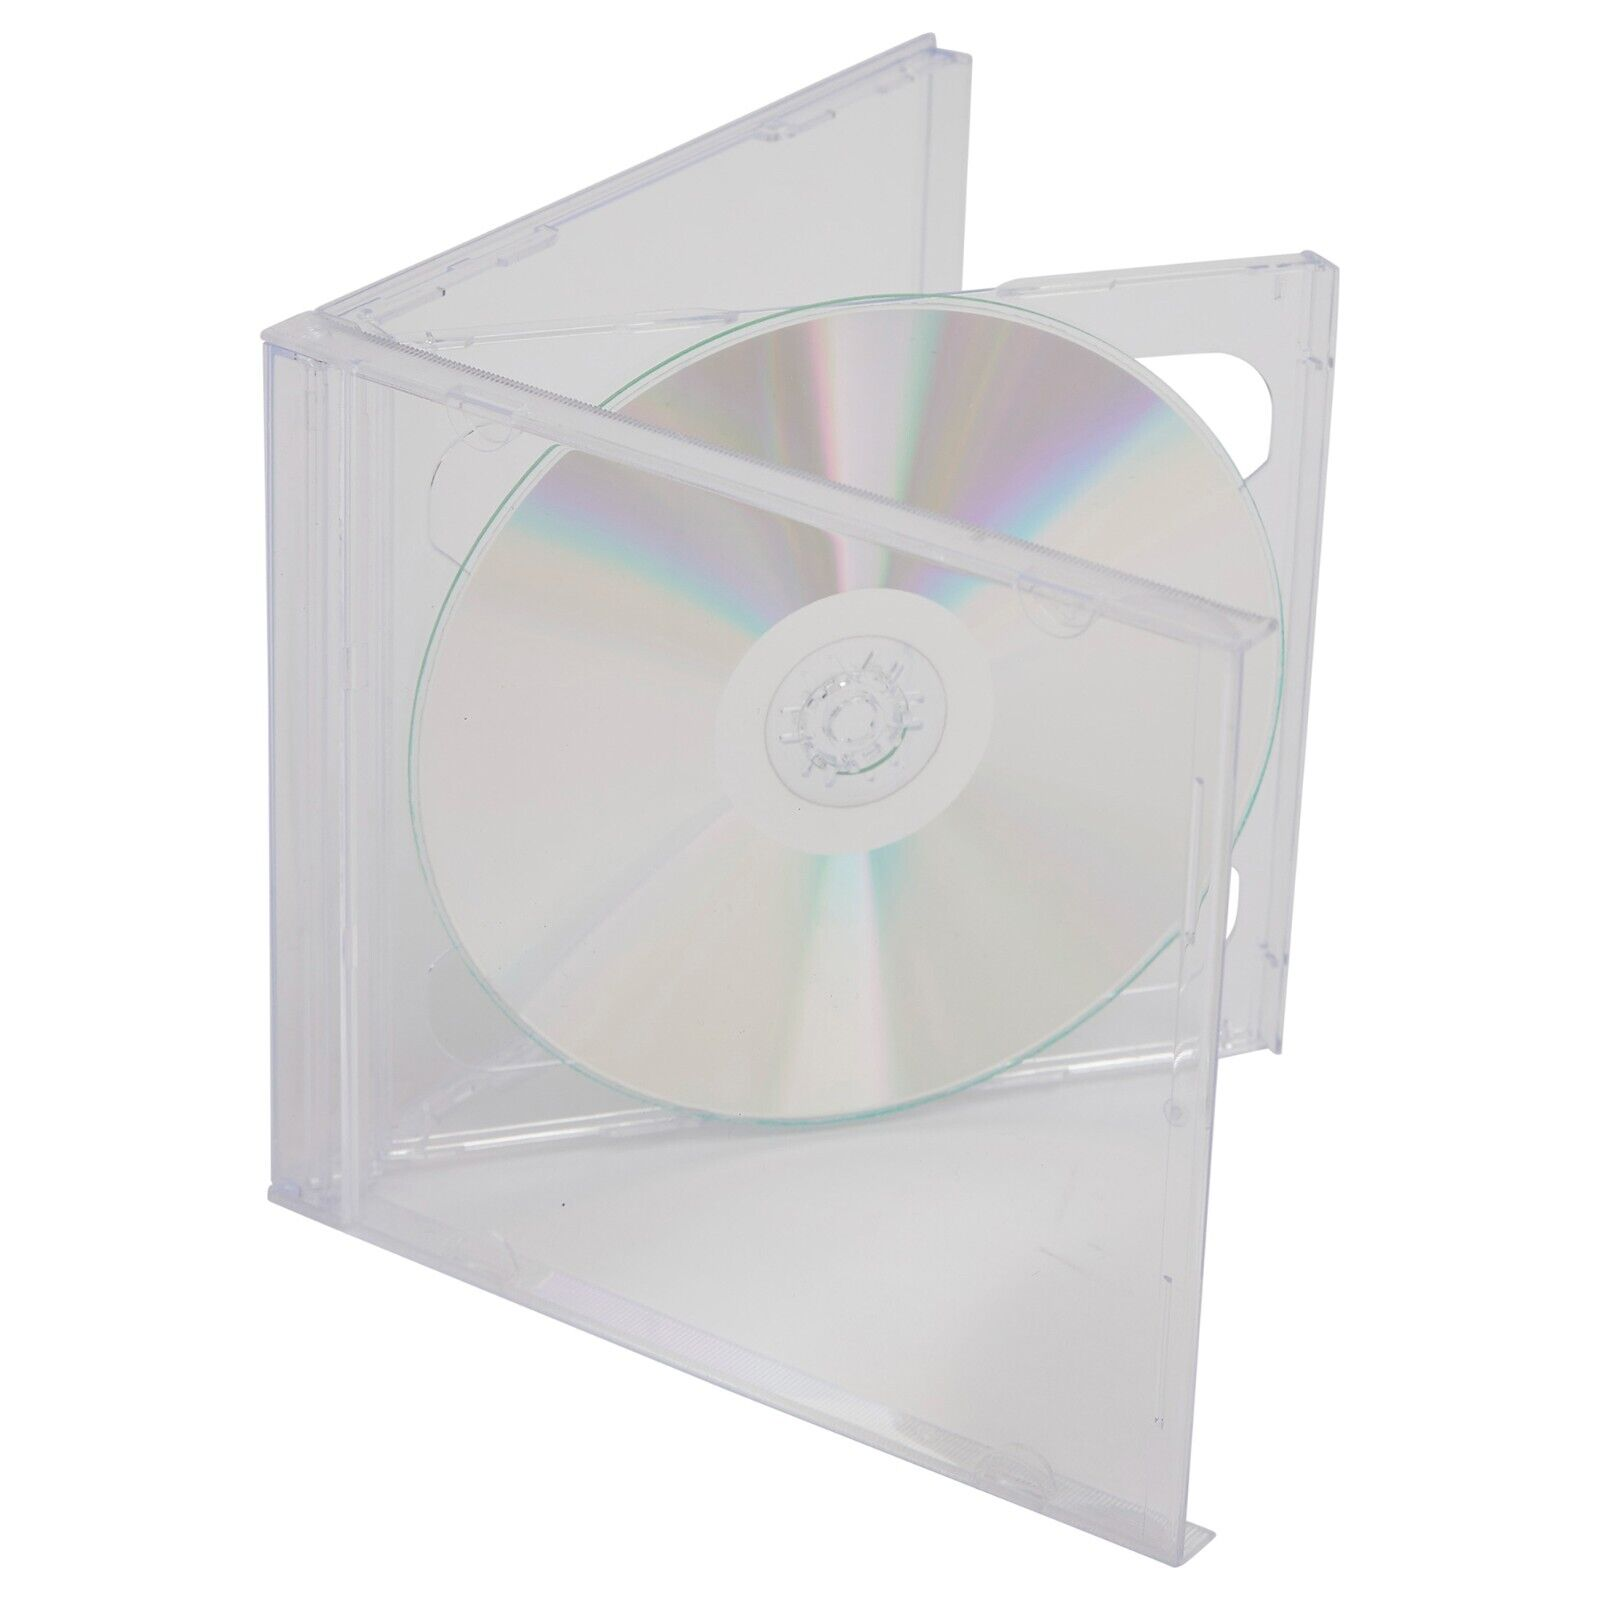 Double Jewel Case w/Assembled Clear Tray (25 Pack) Large Image